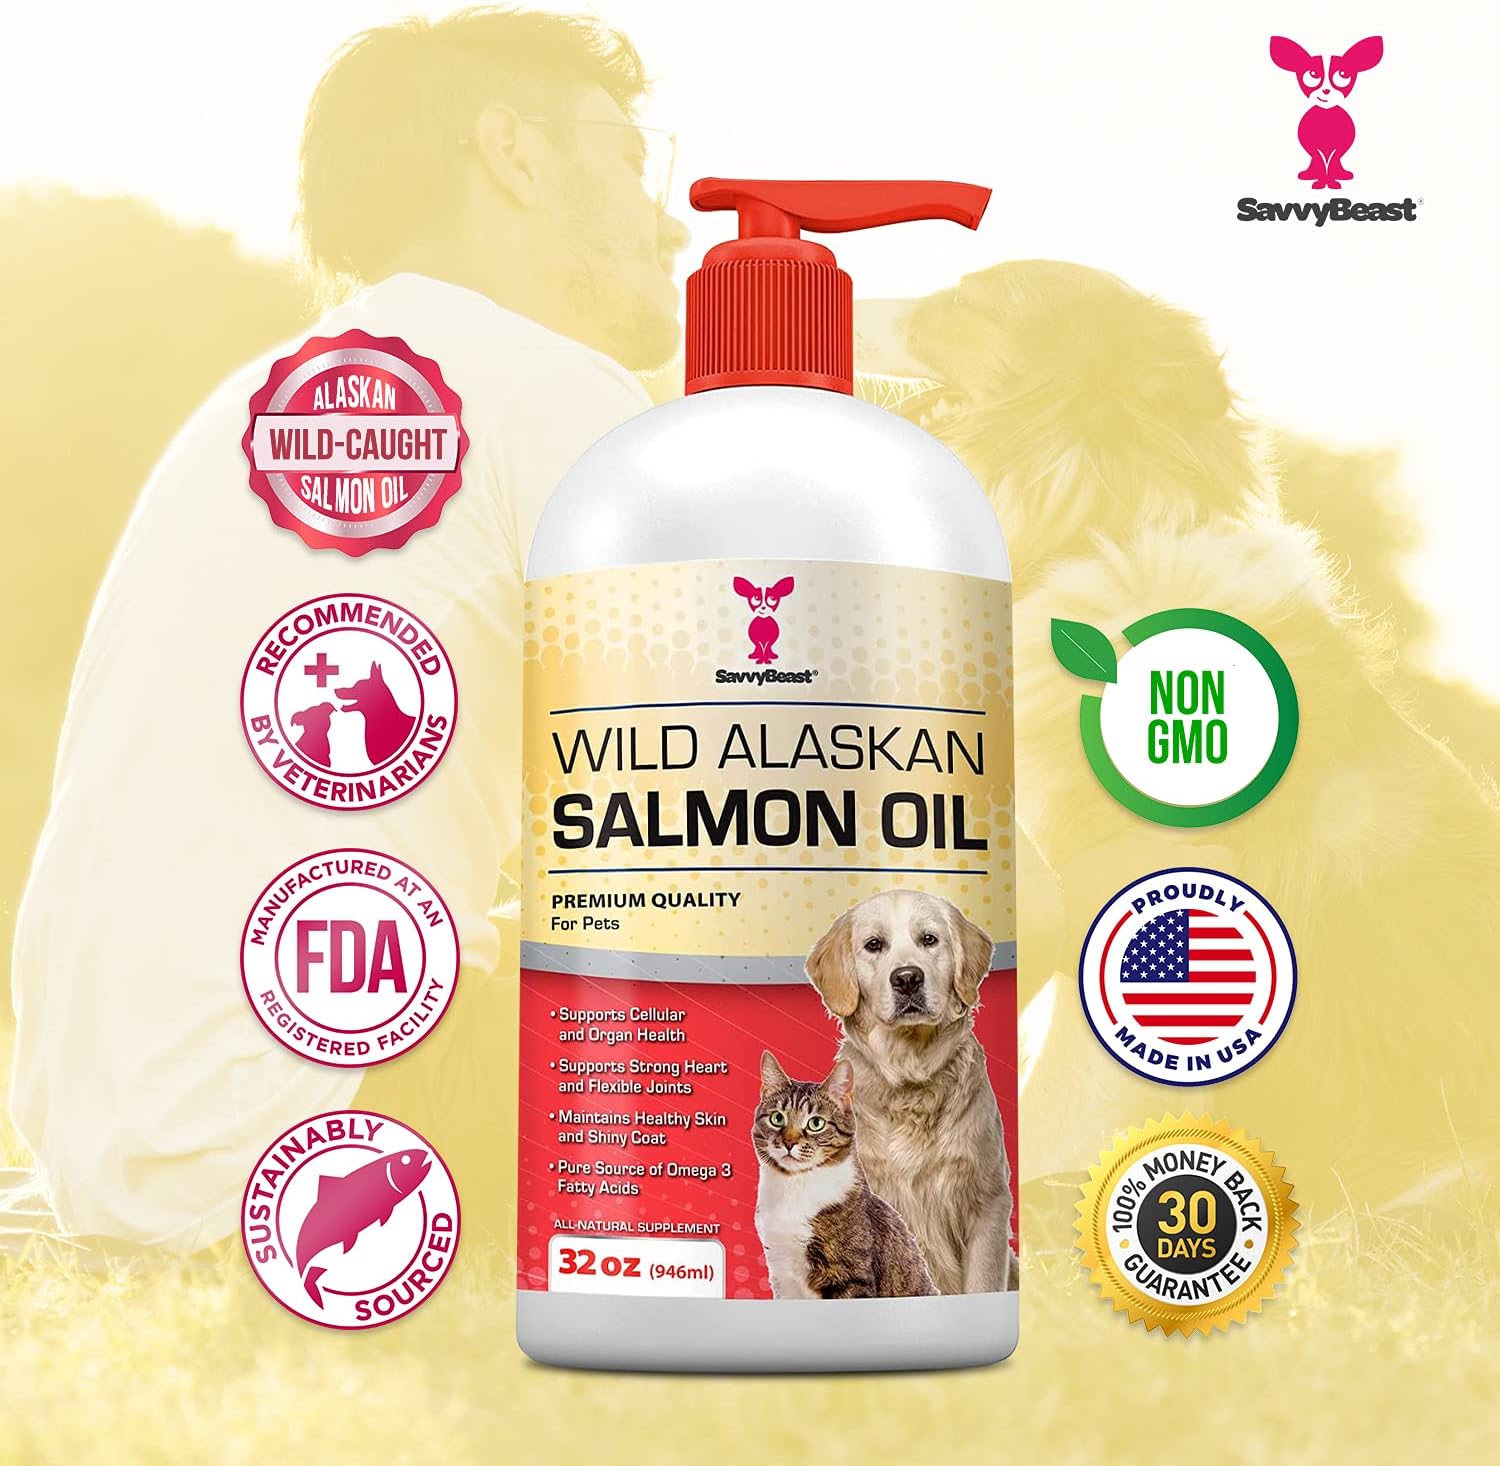 Pure Wild Alaskan Salmon Oil for Dogs, Cats, Ferrets - 32 oz Liquid Omega 3 Fish Oil, Pump on Food - Unscented All Natural Supplement for Skin and Coat, Joints, Heart, Brain, Allergy, Weight, Immune : Pet Supplies